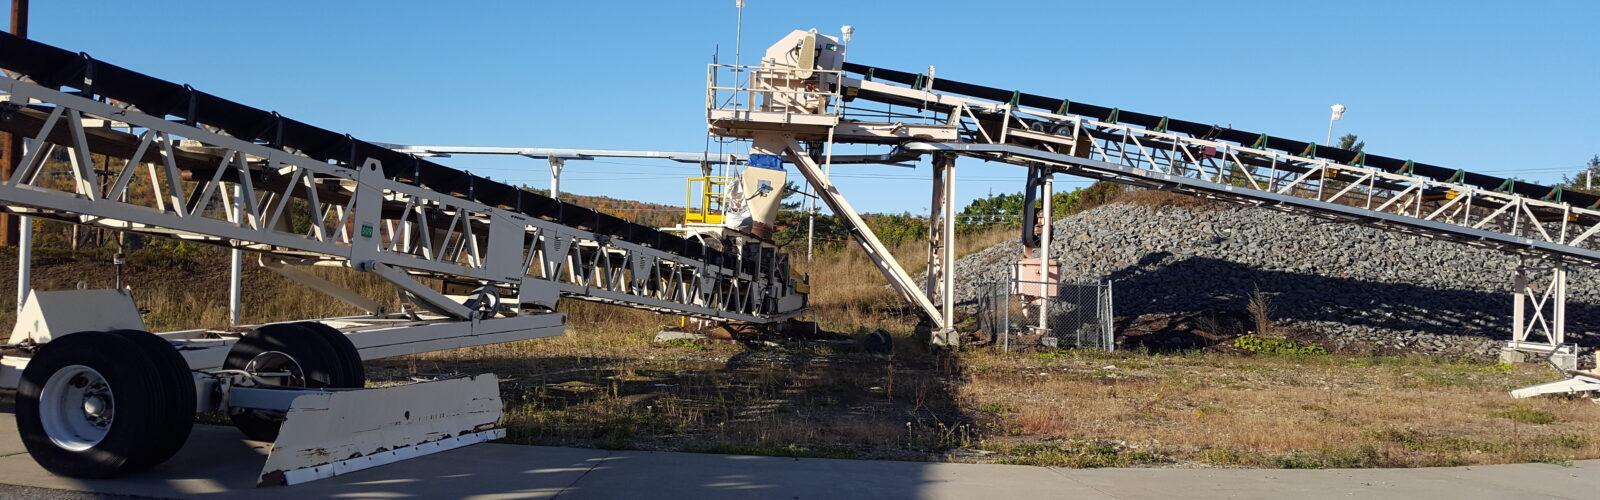 photo of two industrial conveyor belts outside